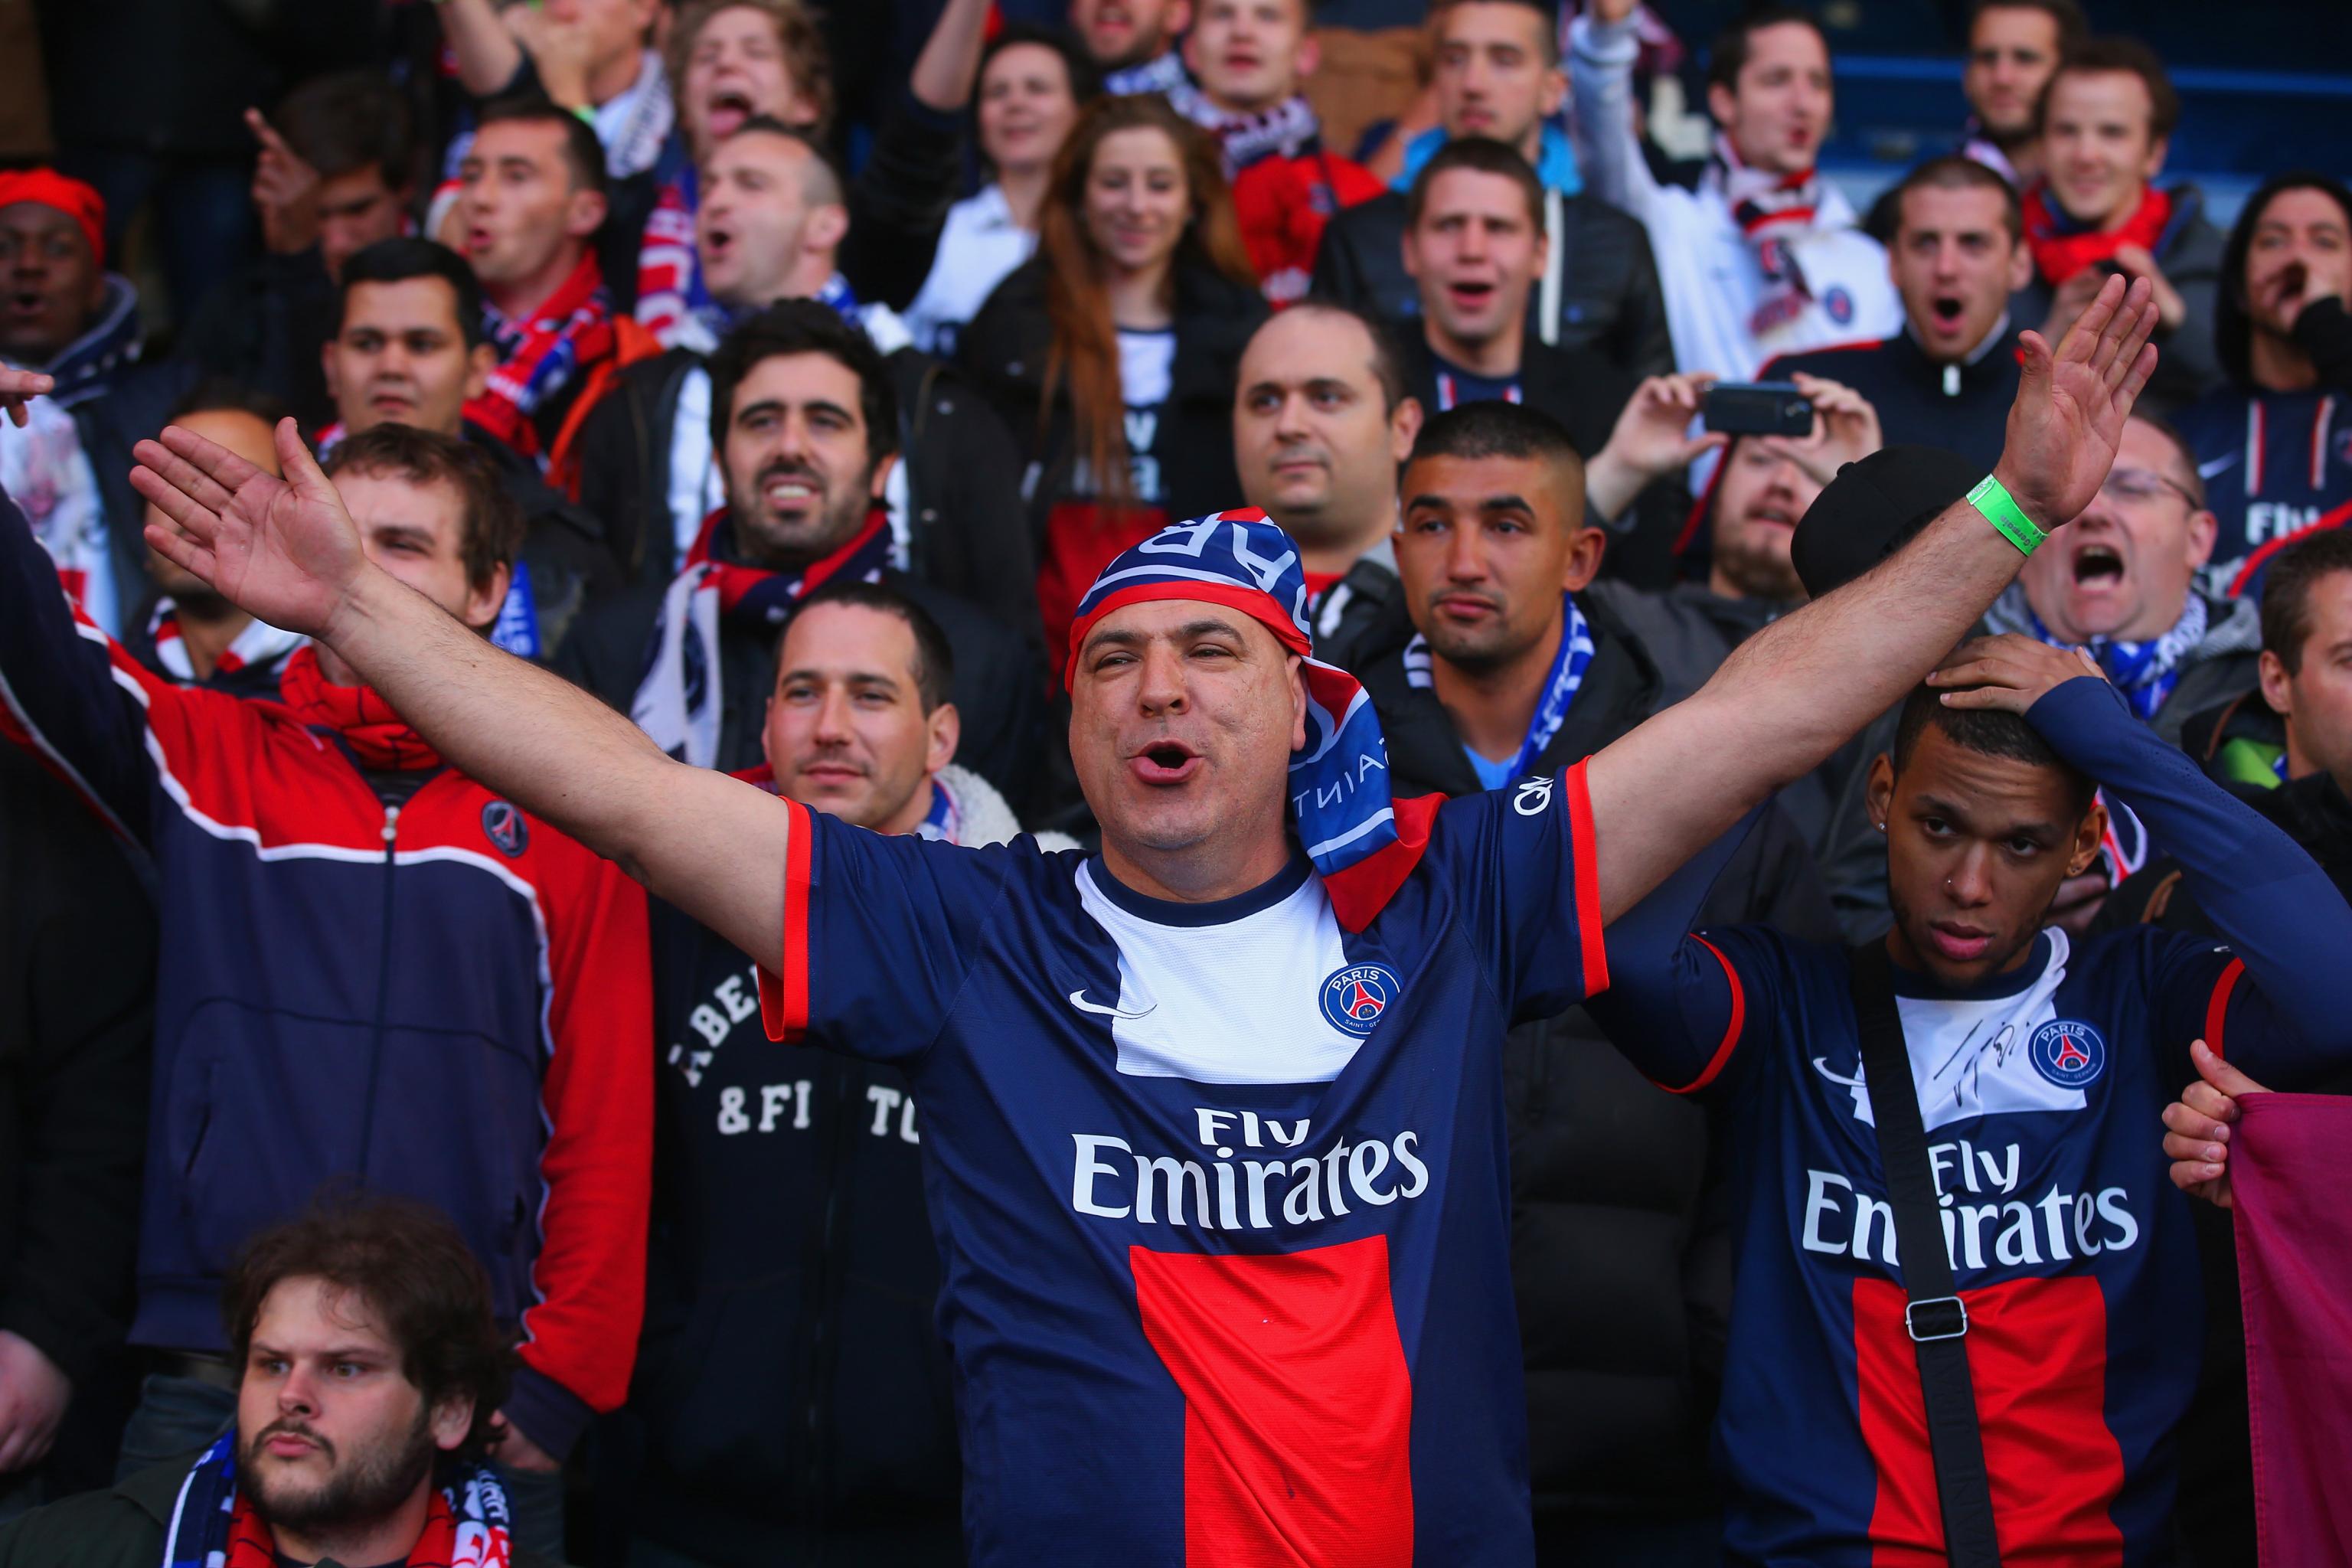 Psg Fans / Video If You Think Psg Fans Don T Exist Watch Them Welcome